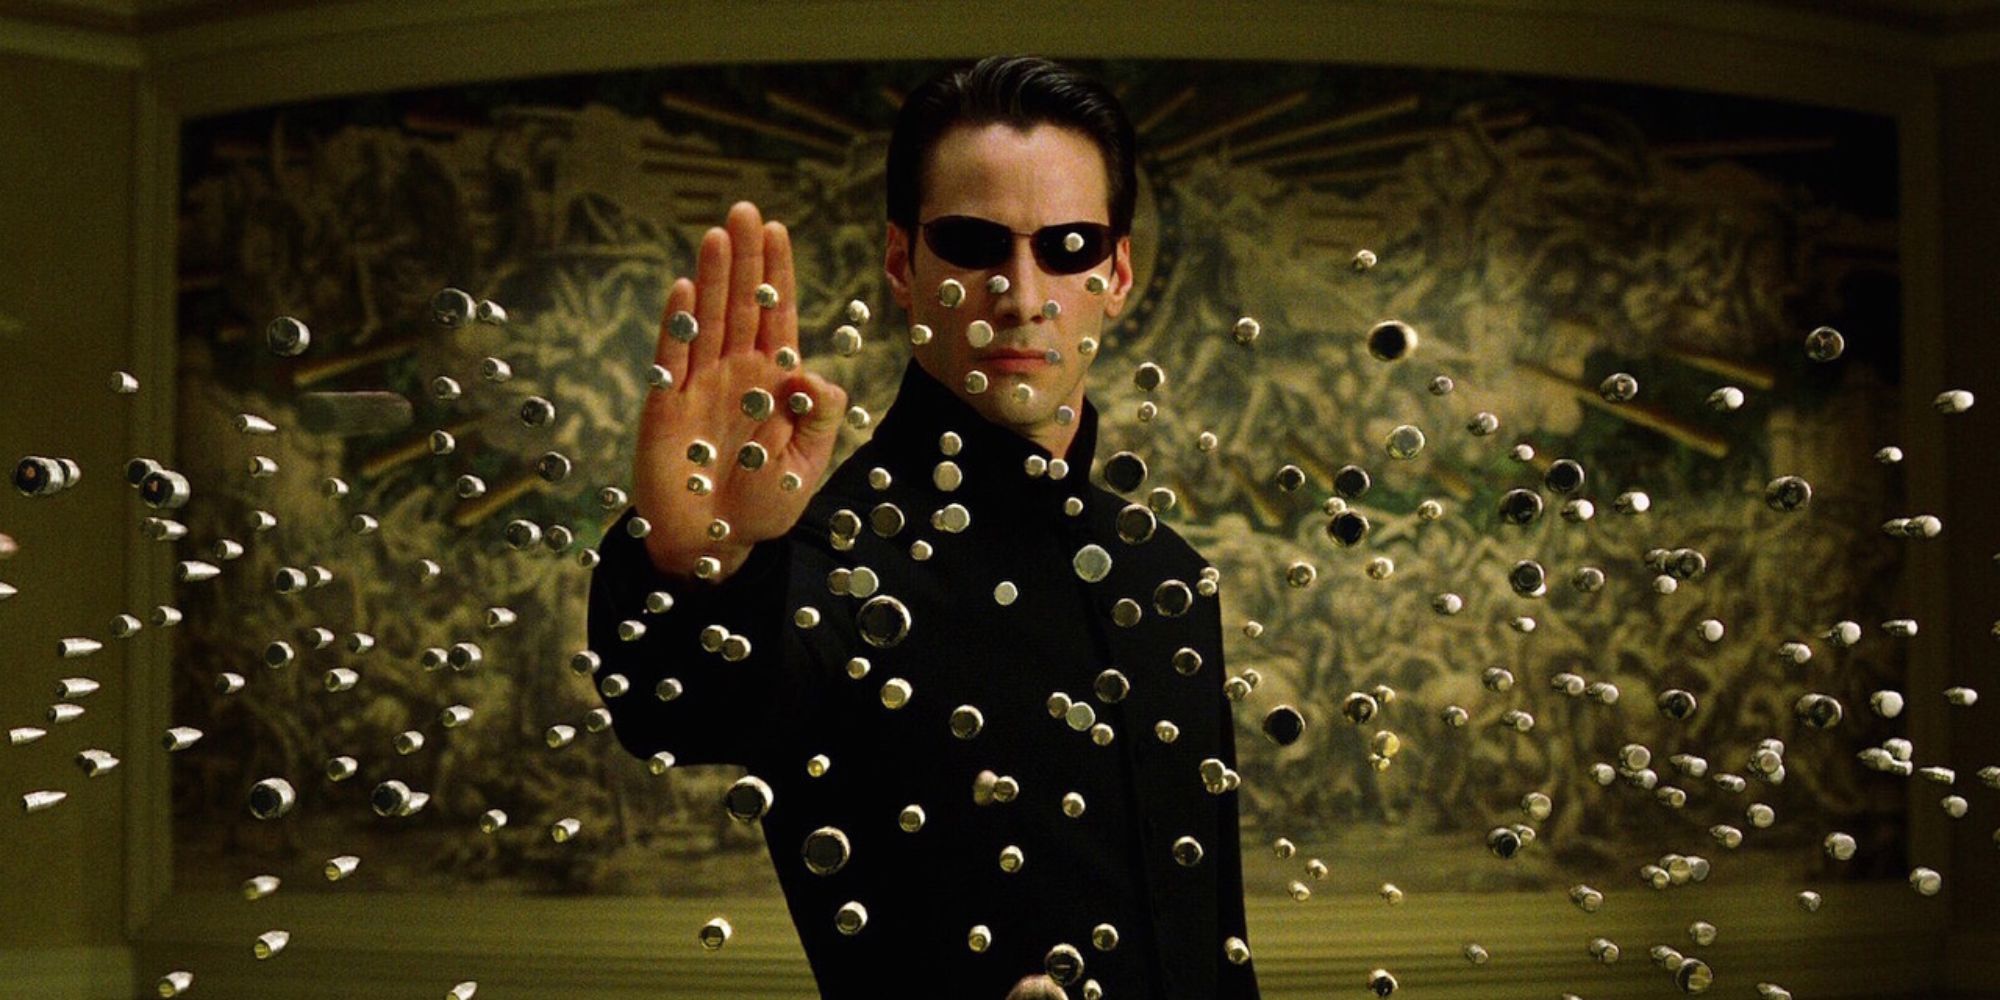 Keanu Reeves as Neo stopping bullets in The Matrix Reloaded (2003)